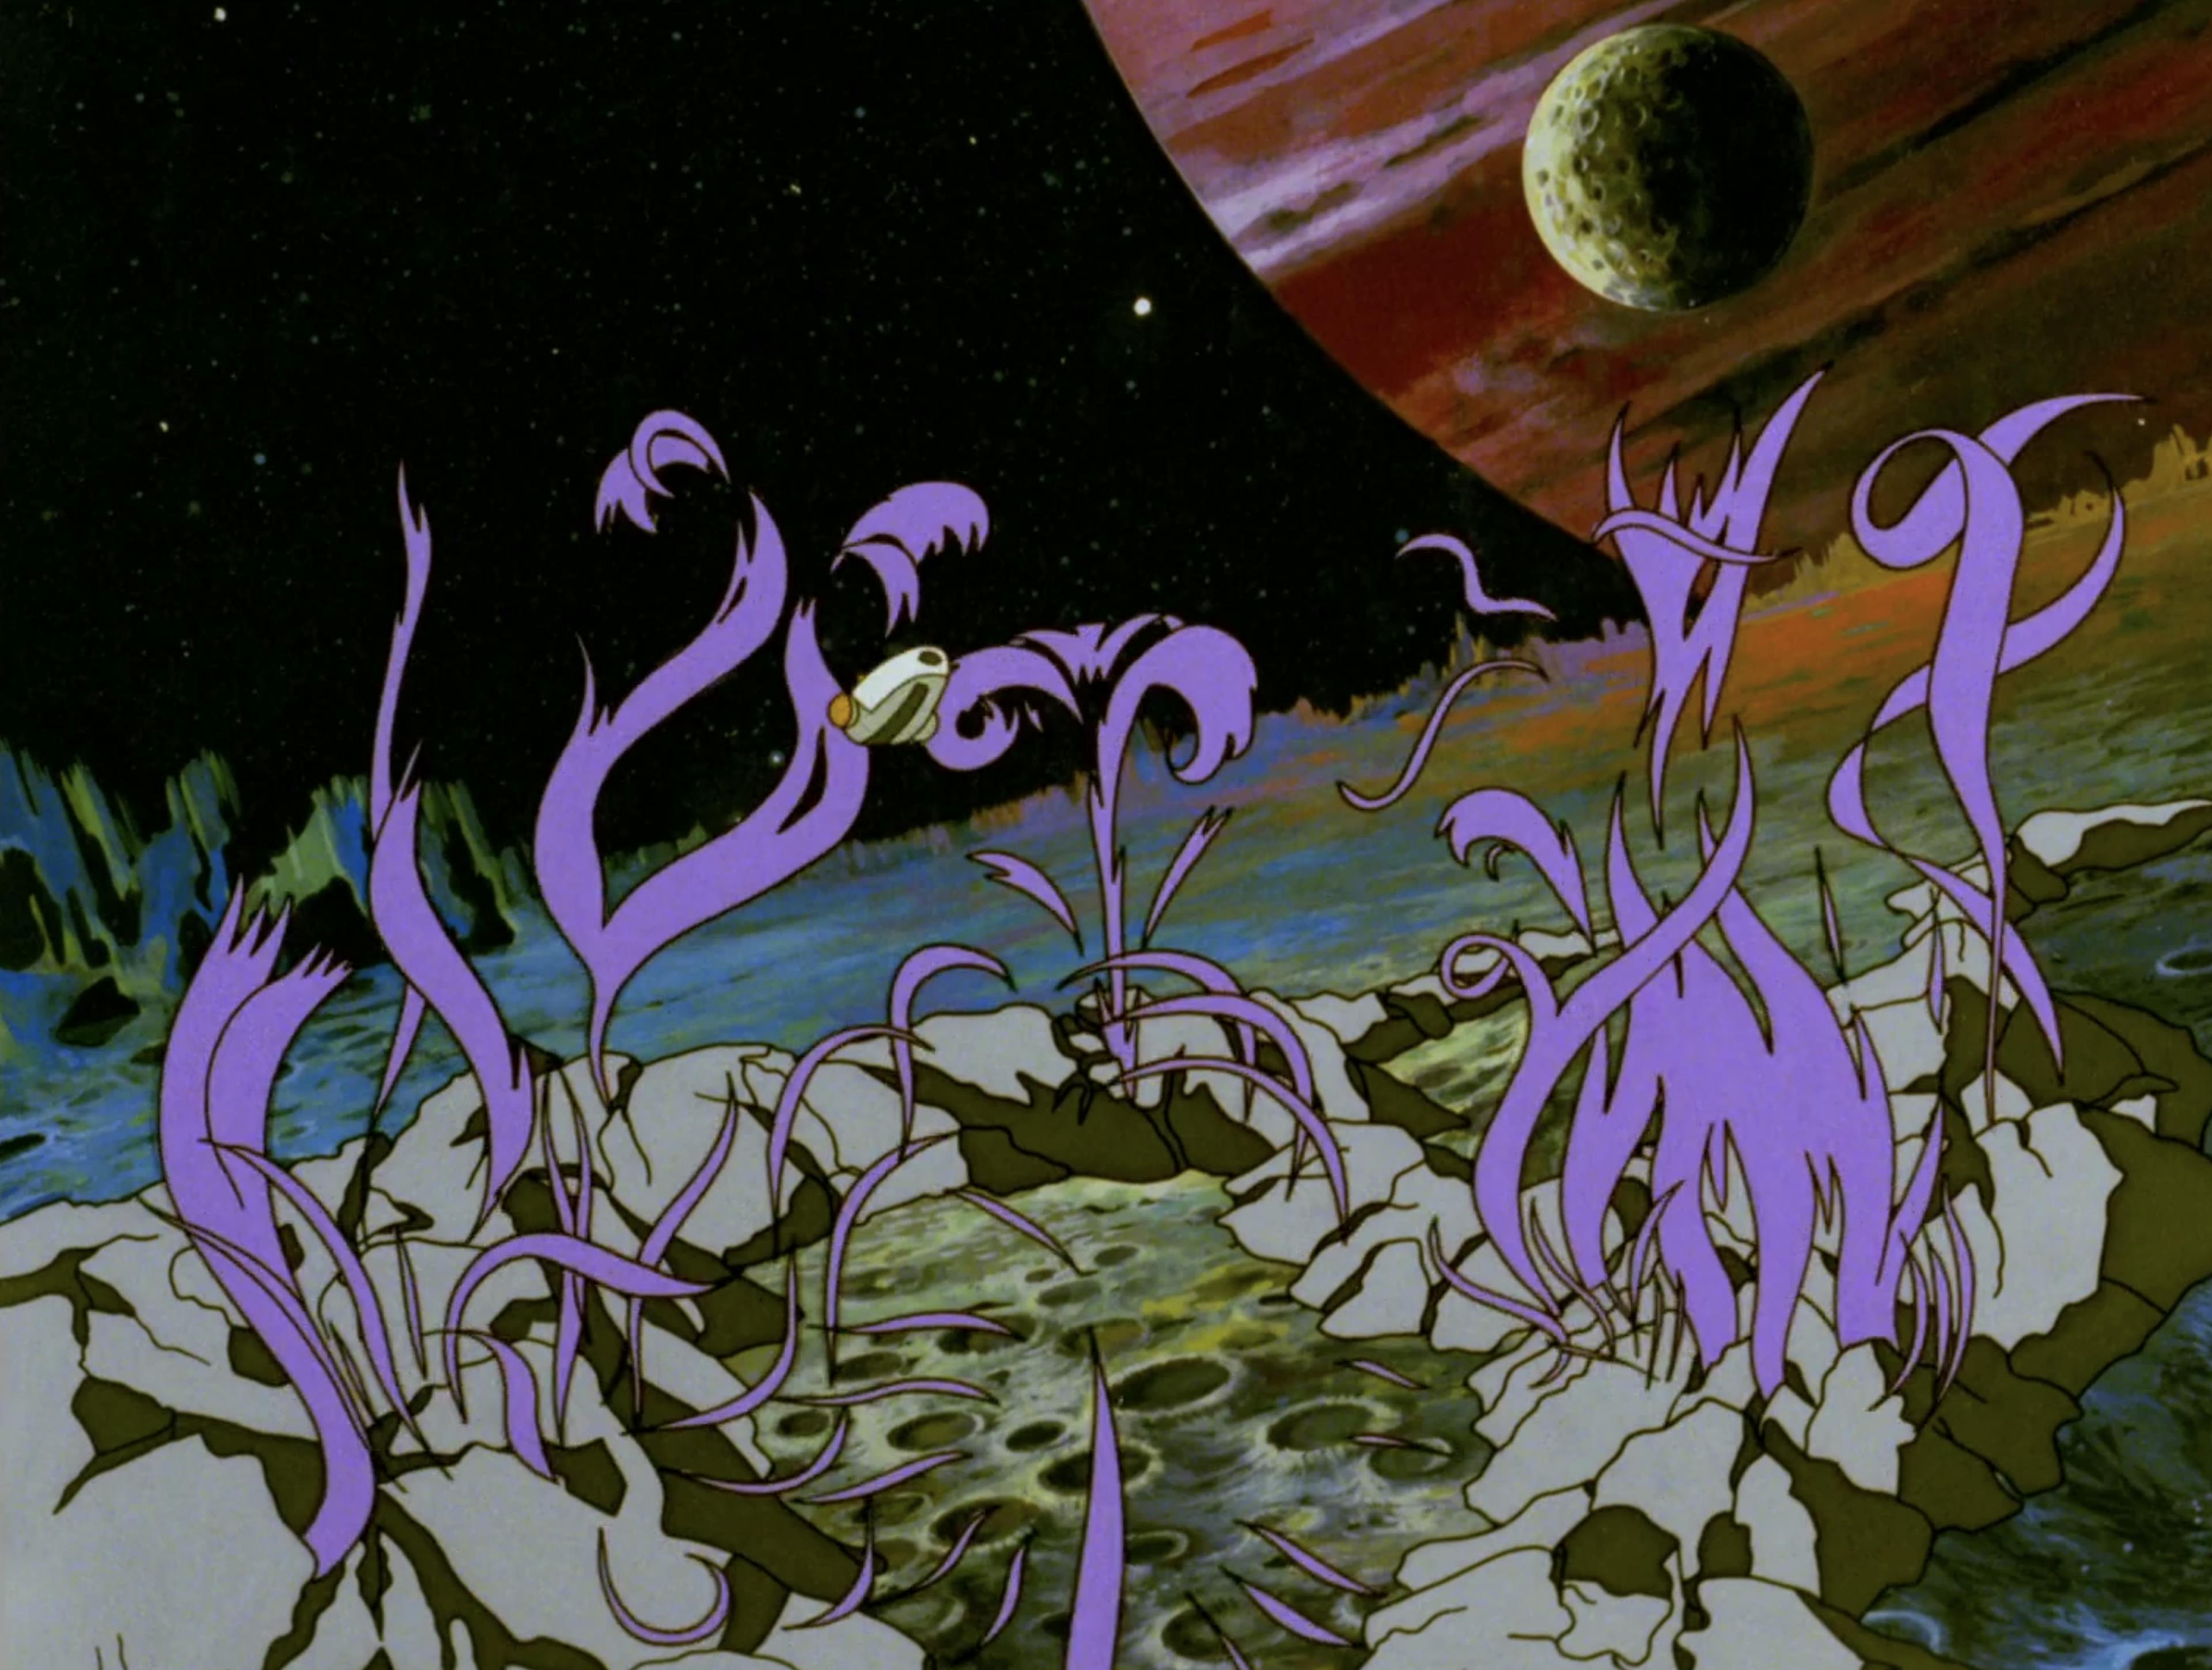 A spaceship lands on the cratered surface of an alien world. Large purple tendrils swirl through the air around it.